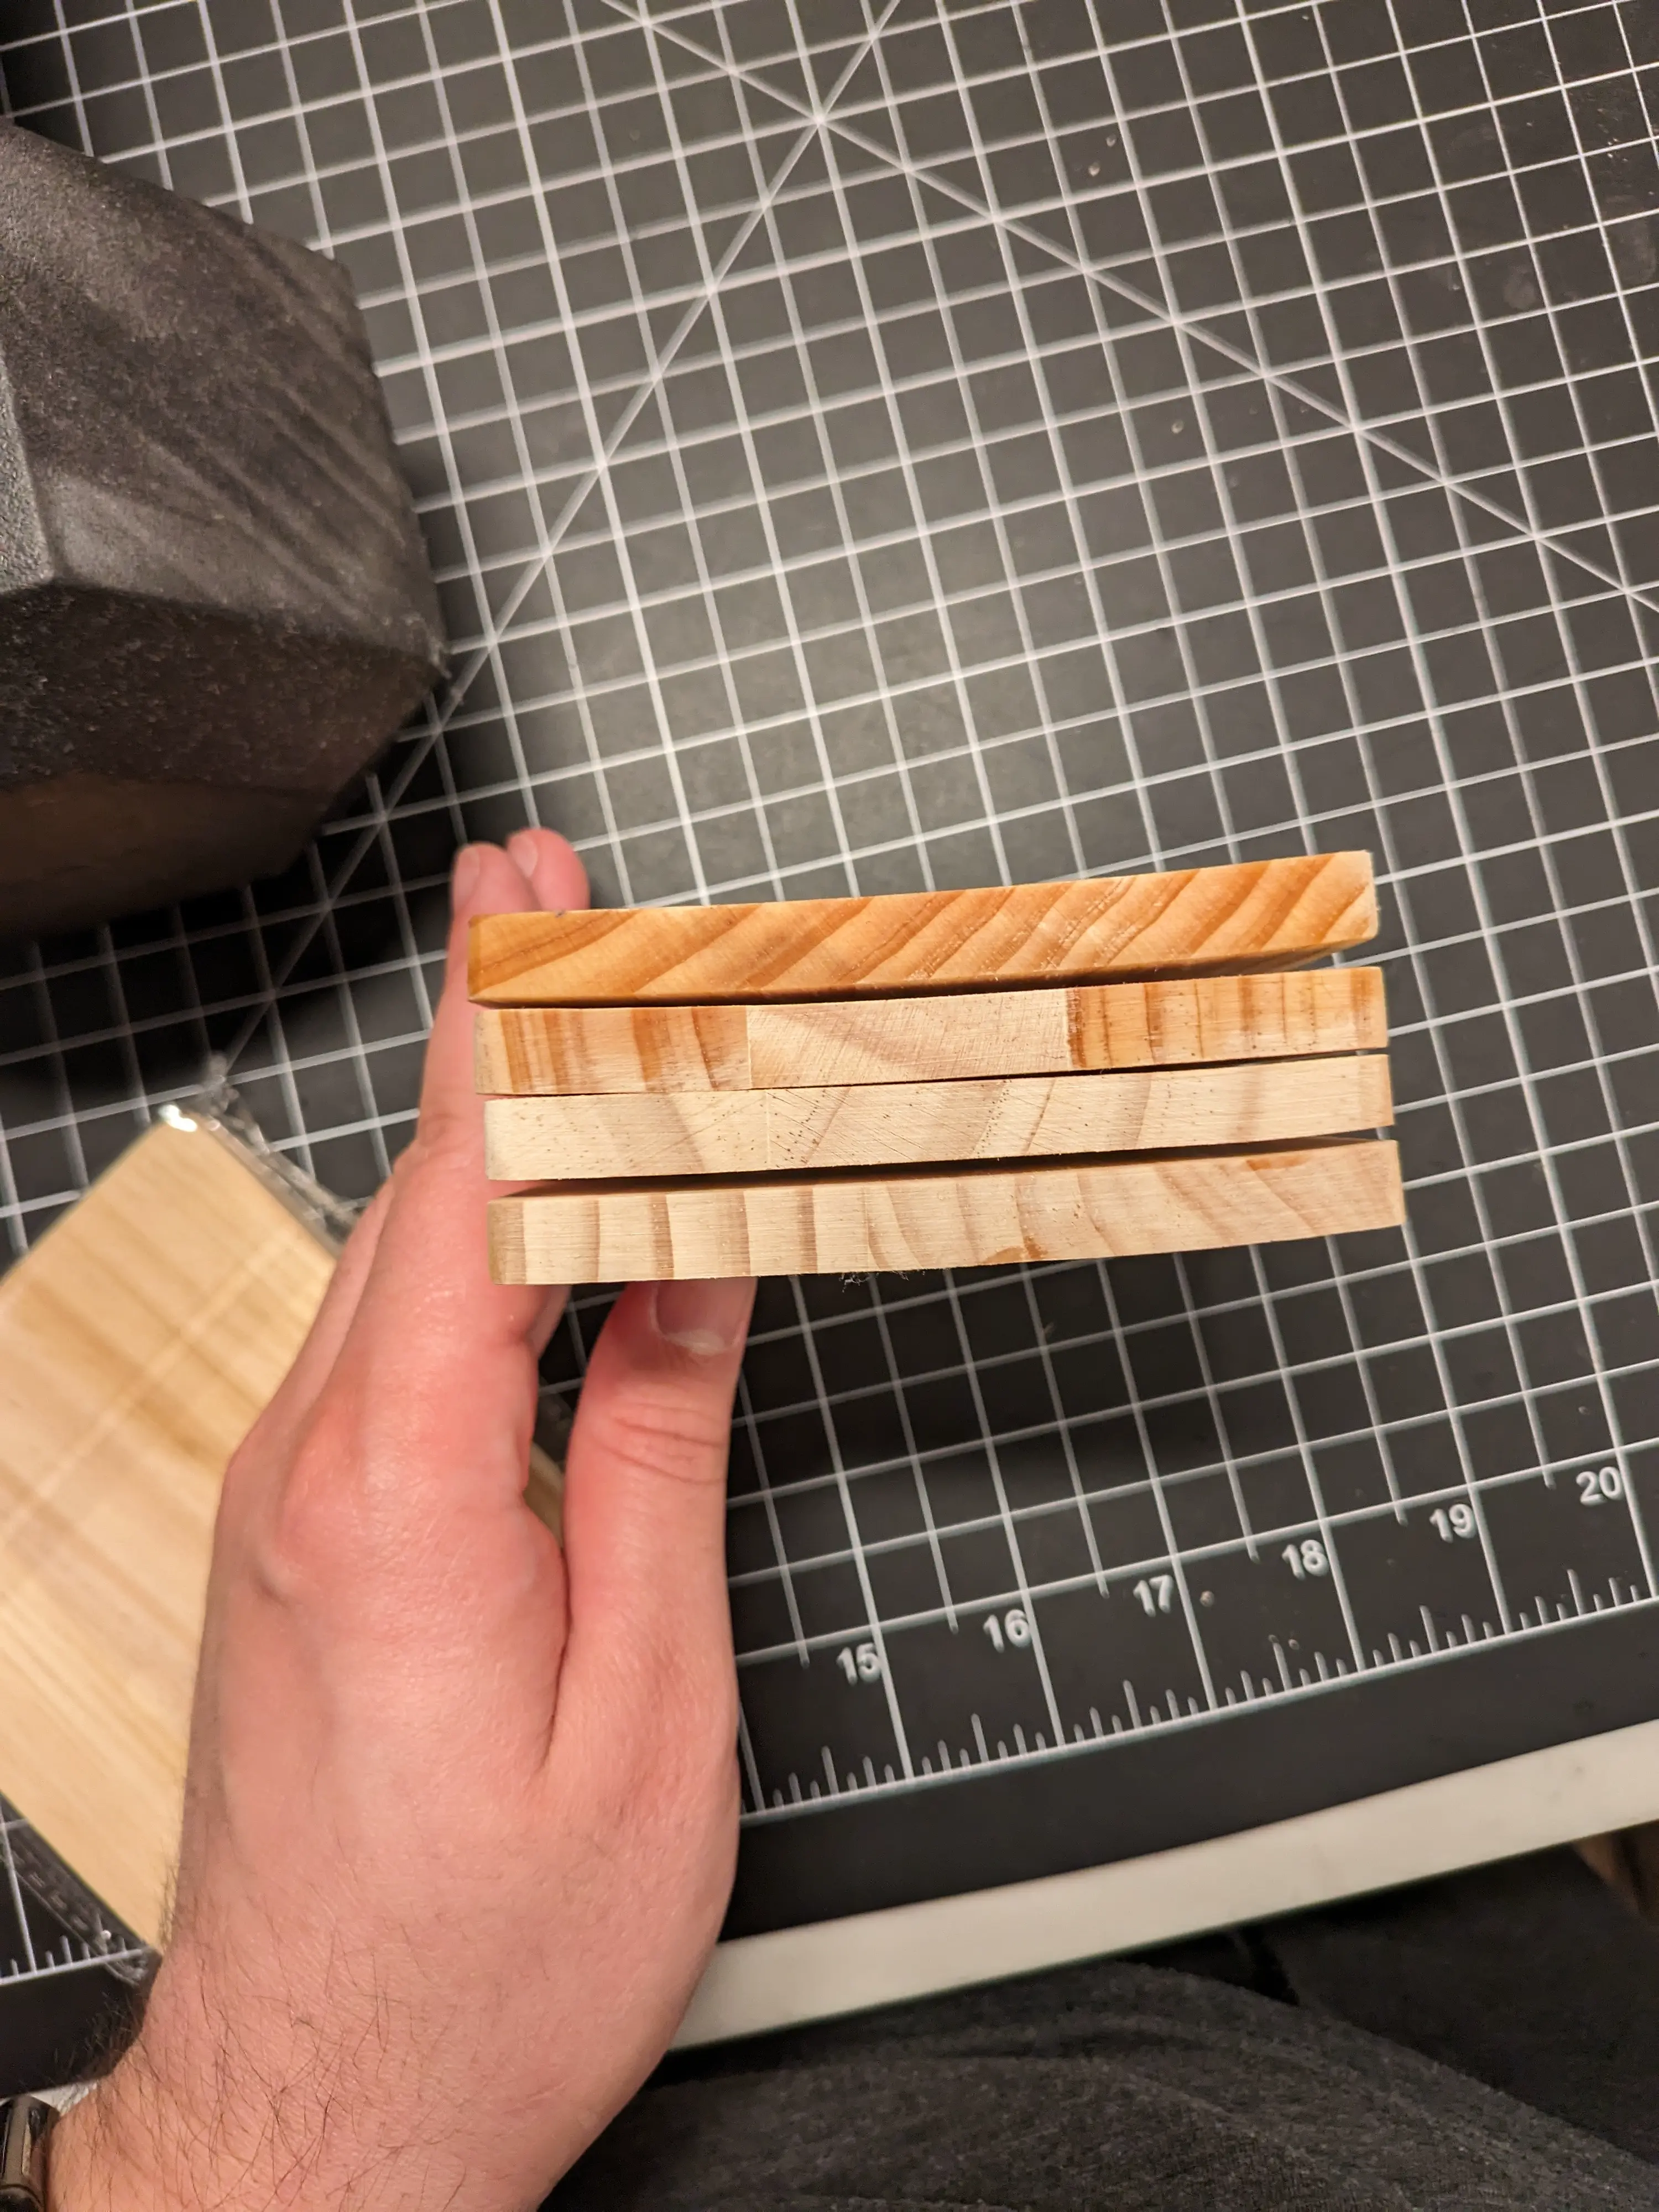 Image showing the coasters in profile. Rather than being flat, the coasters appear curved.